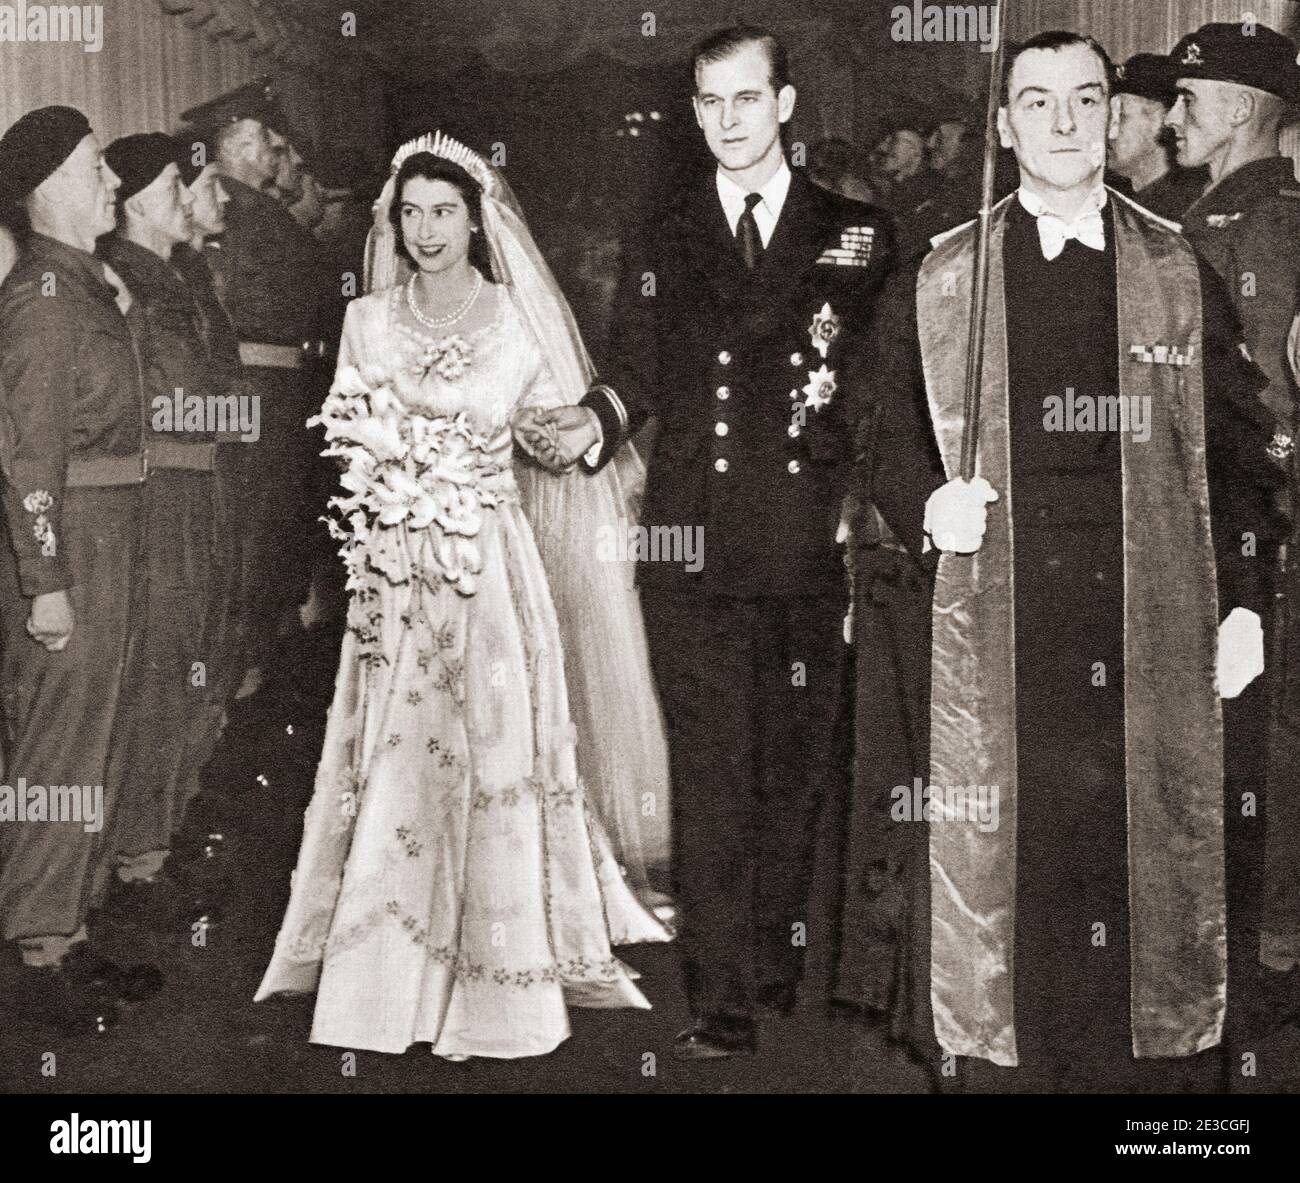 EDITORIAL ONLY The wedding day of Princess Elizabeth of York and Prince Philip, Duke of Edinburgh, 1947.  Princess Elizabeth of York, 1926 - 2022, future Elizabeth II,  Queen of the United Kingdom.  Prince Philip, Duke of Edinburgh born Prince Philip of Greece and Denmark,1921- 2021. Husband of Queen Elizabeth II of the United Kingdom and other Commonwealth realms.  From The Queen Elizabeth Coronation Book, published 1953. Stock Photo